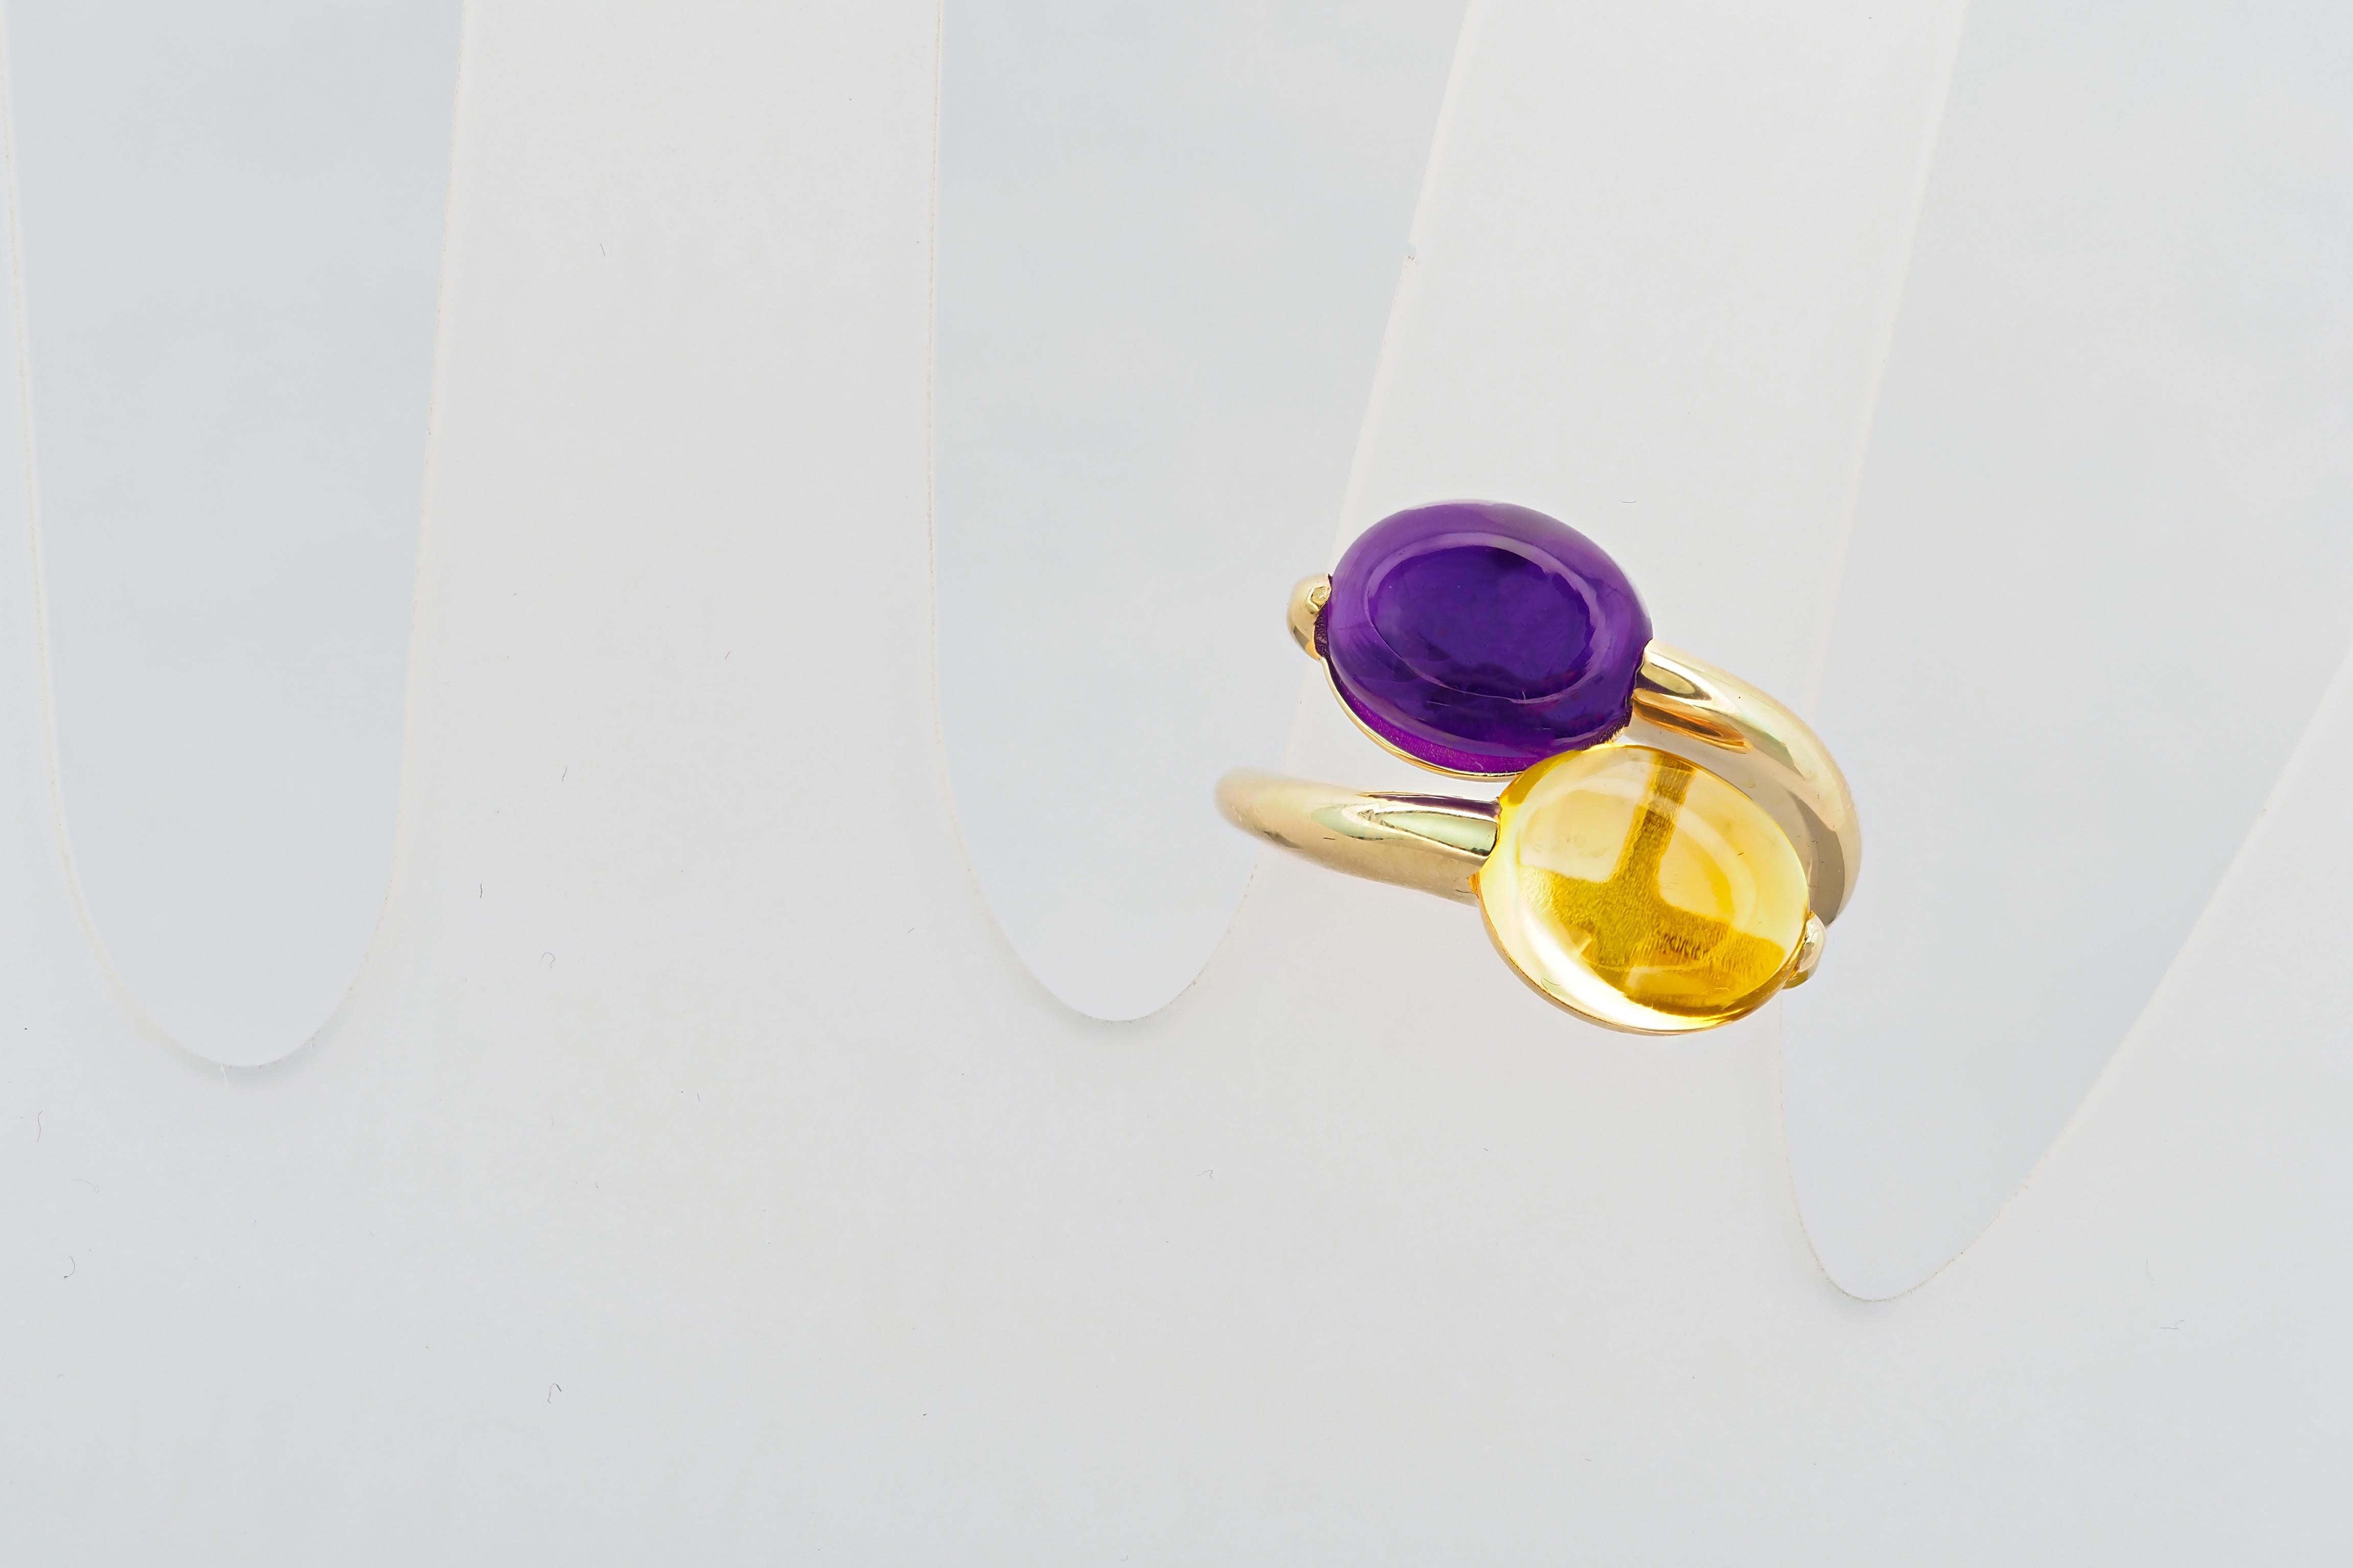 14 kt solid gold ring with natural amethyst and citrine cabochons. February birthstone. November birthstone.
Total Weight: 4 g (+-depends from size)

Gemstones: 
Natural amethyst:
Weight: approx 2.50 ct in total, oval cabochon cut
Clarity: